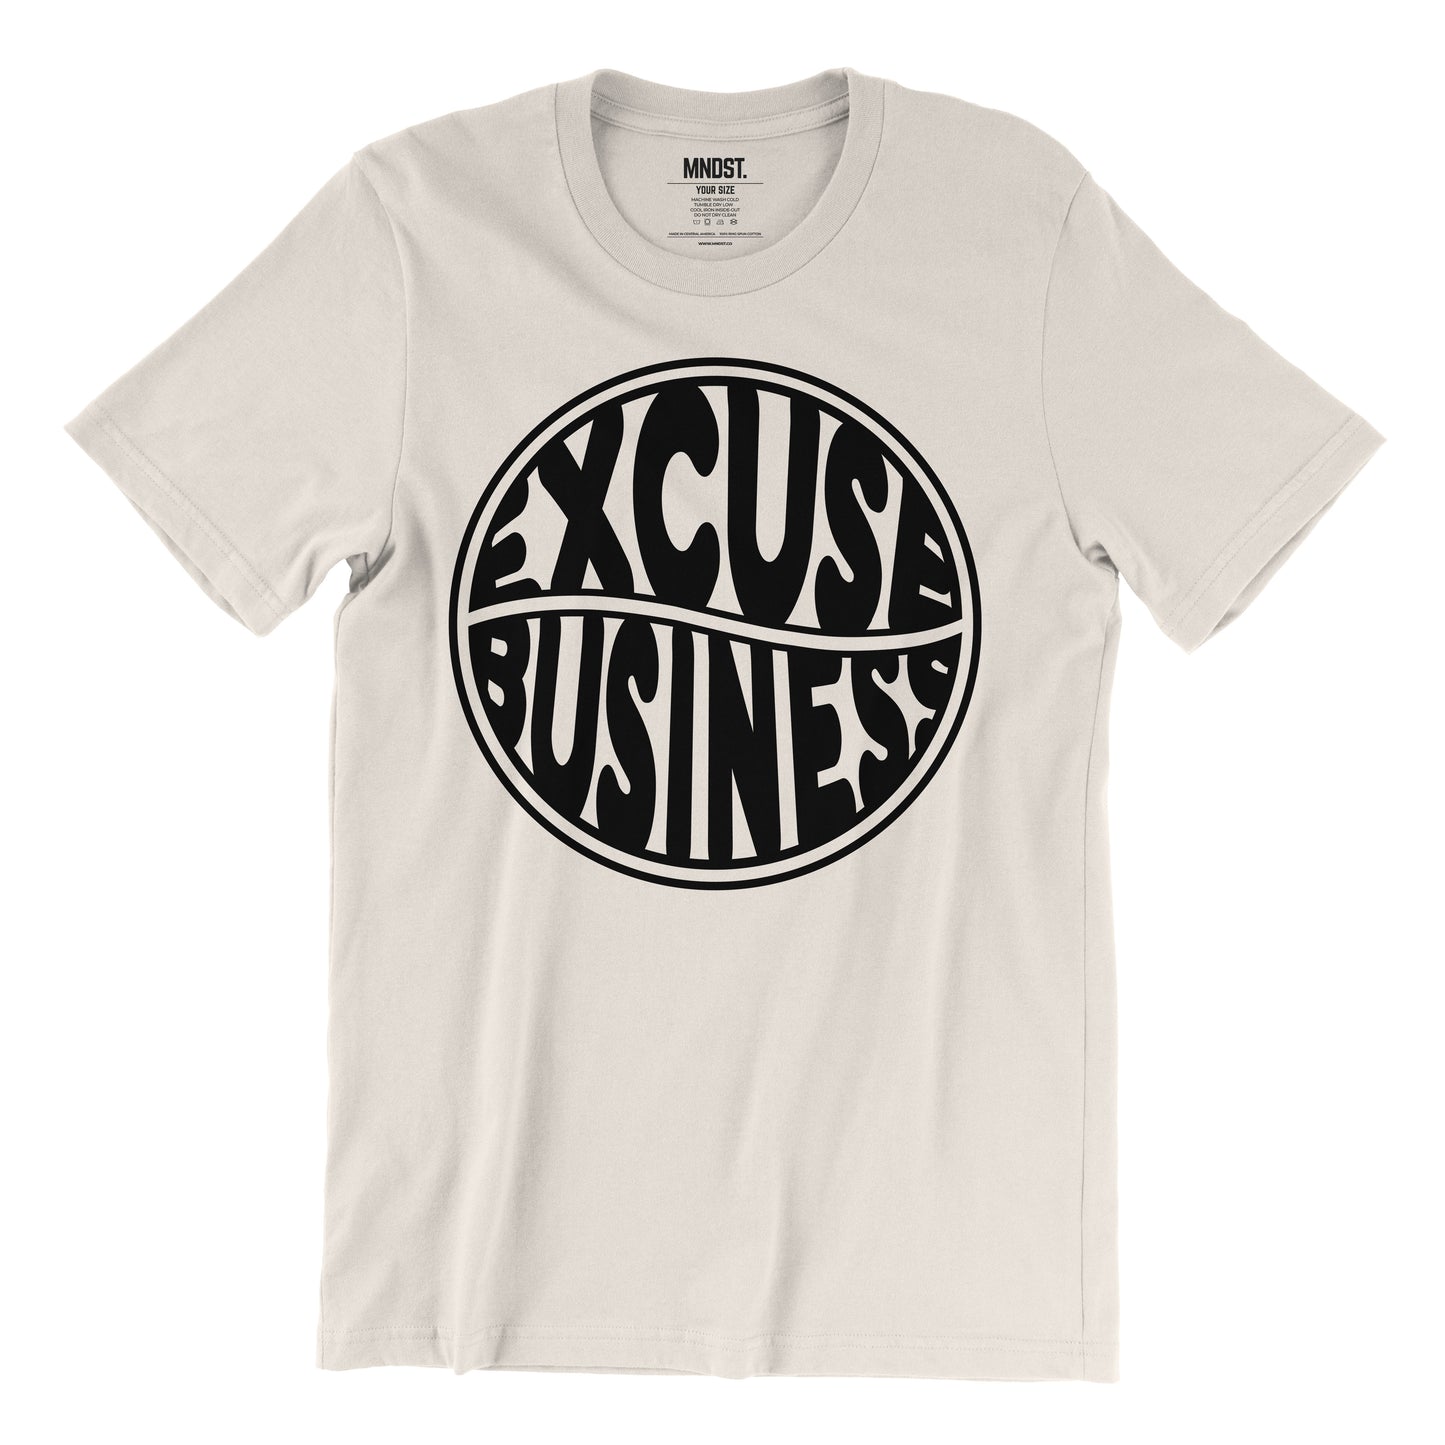 MNDST. Excuse Business T-Shirt